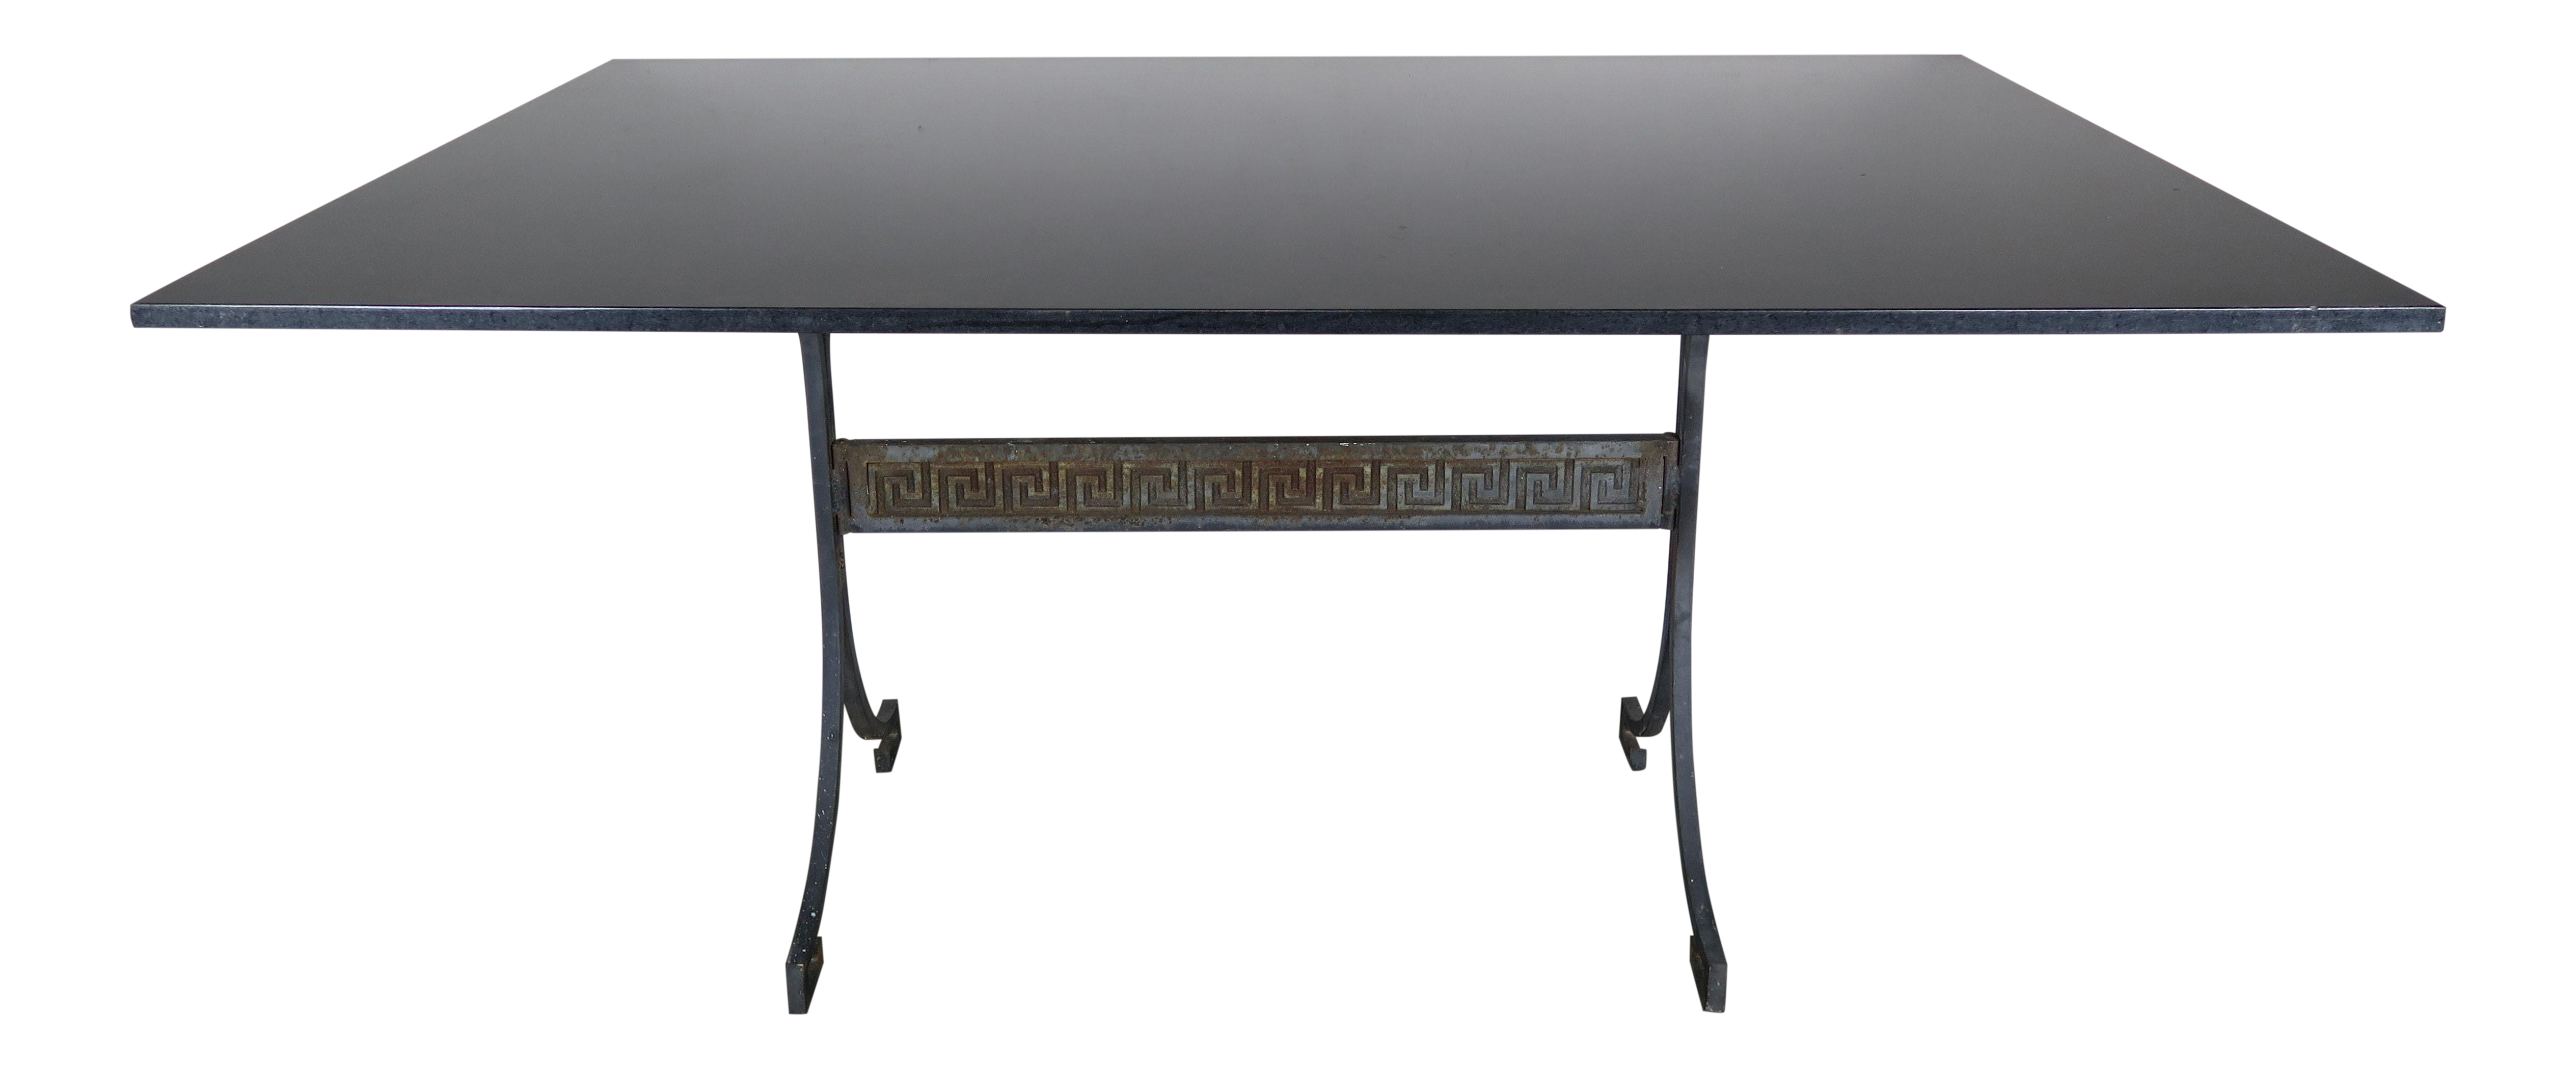 greek key iron and marble bistro table circa chairish accent patio stand pool dining round bedside covers yellow home accents battery operated lights target makeup vanity half